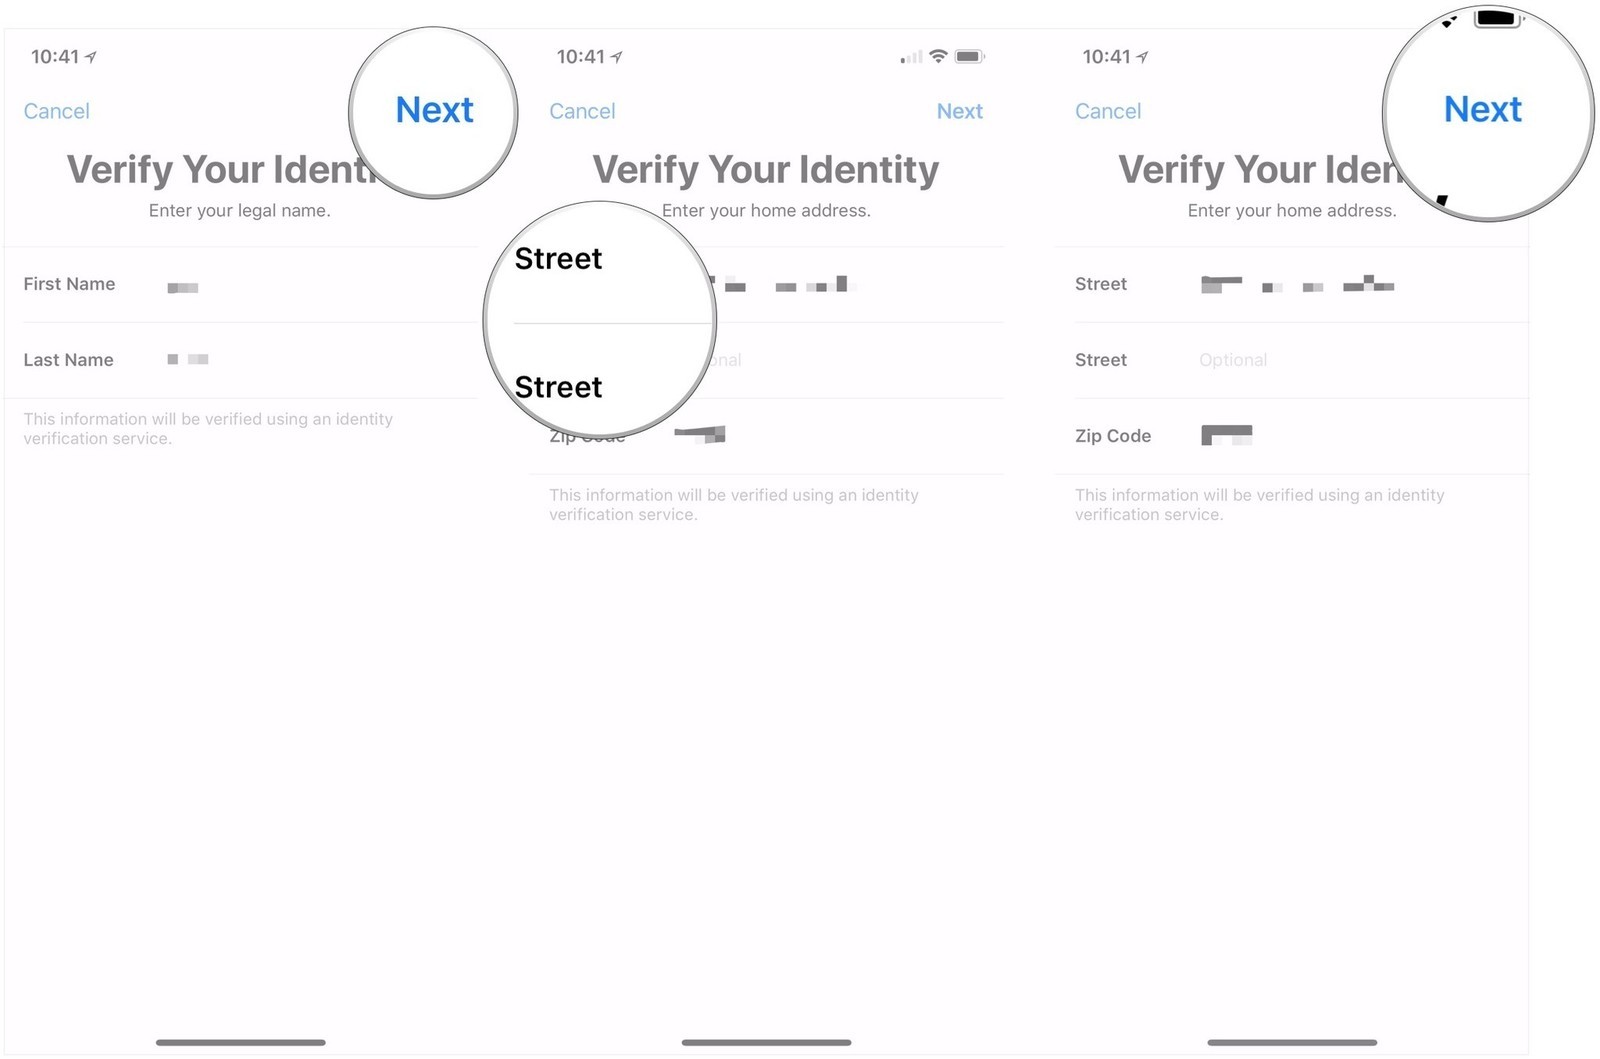 How to Verify Your Identity for Apple Pay?